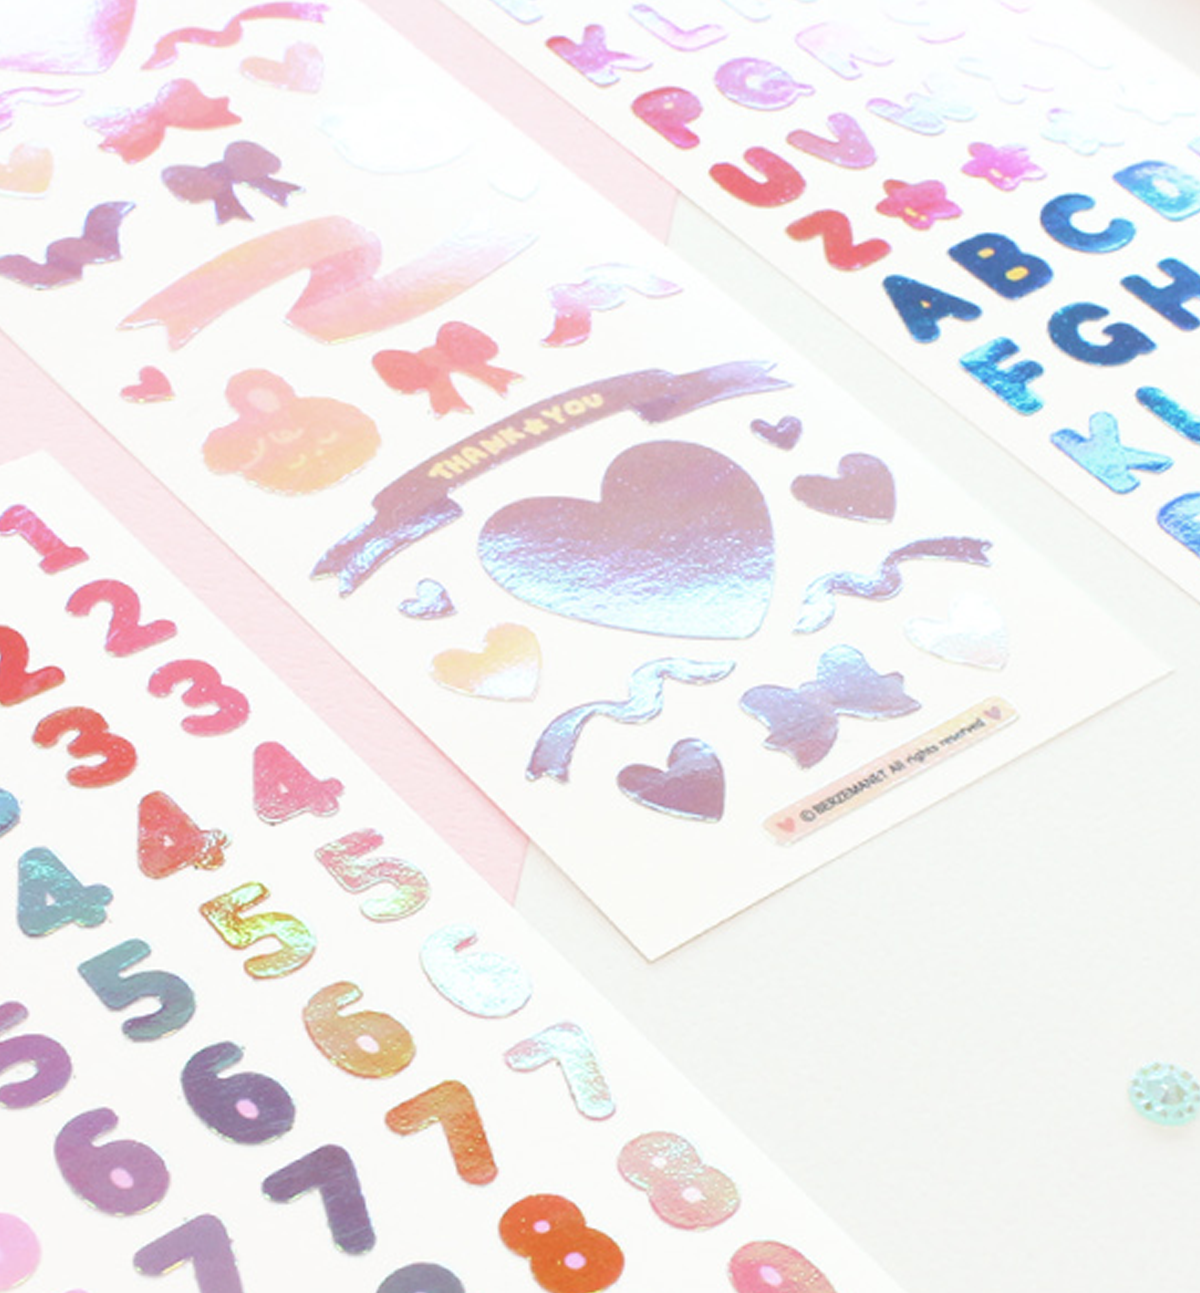 Manet Pearly Seal Sticker Ver. 2 [Aurora Pearl]